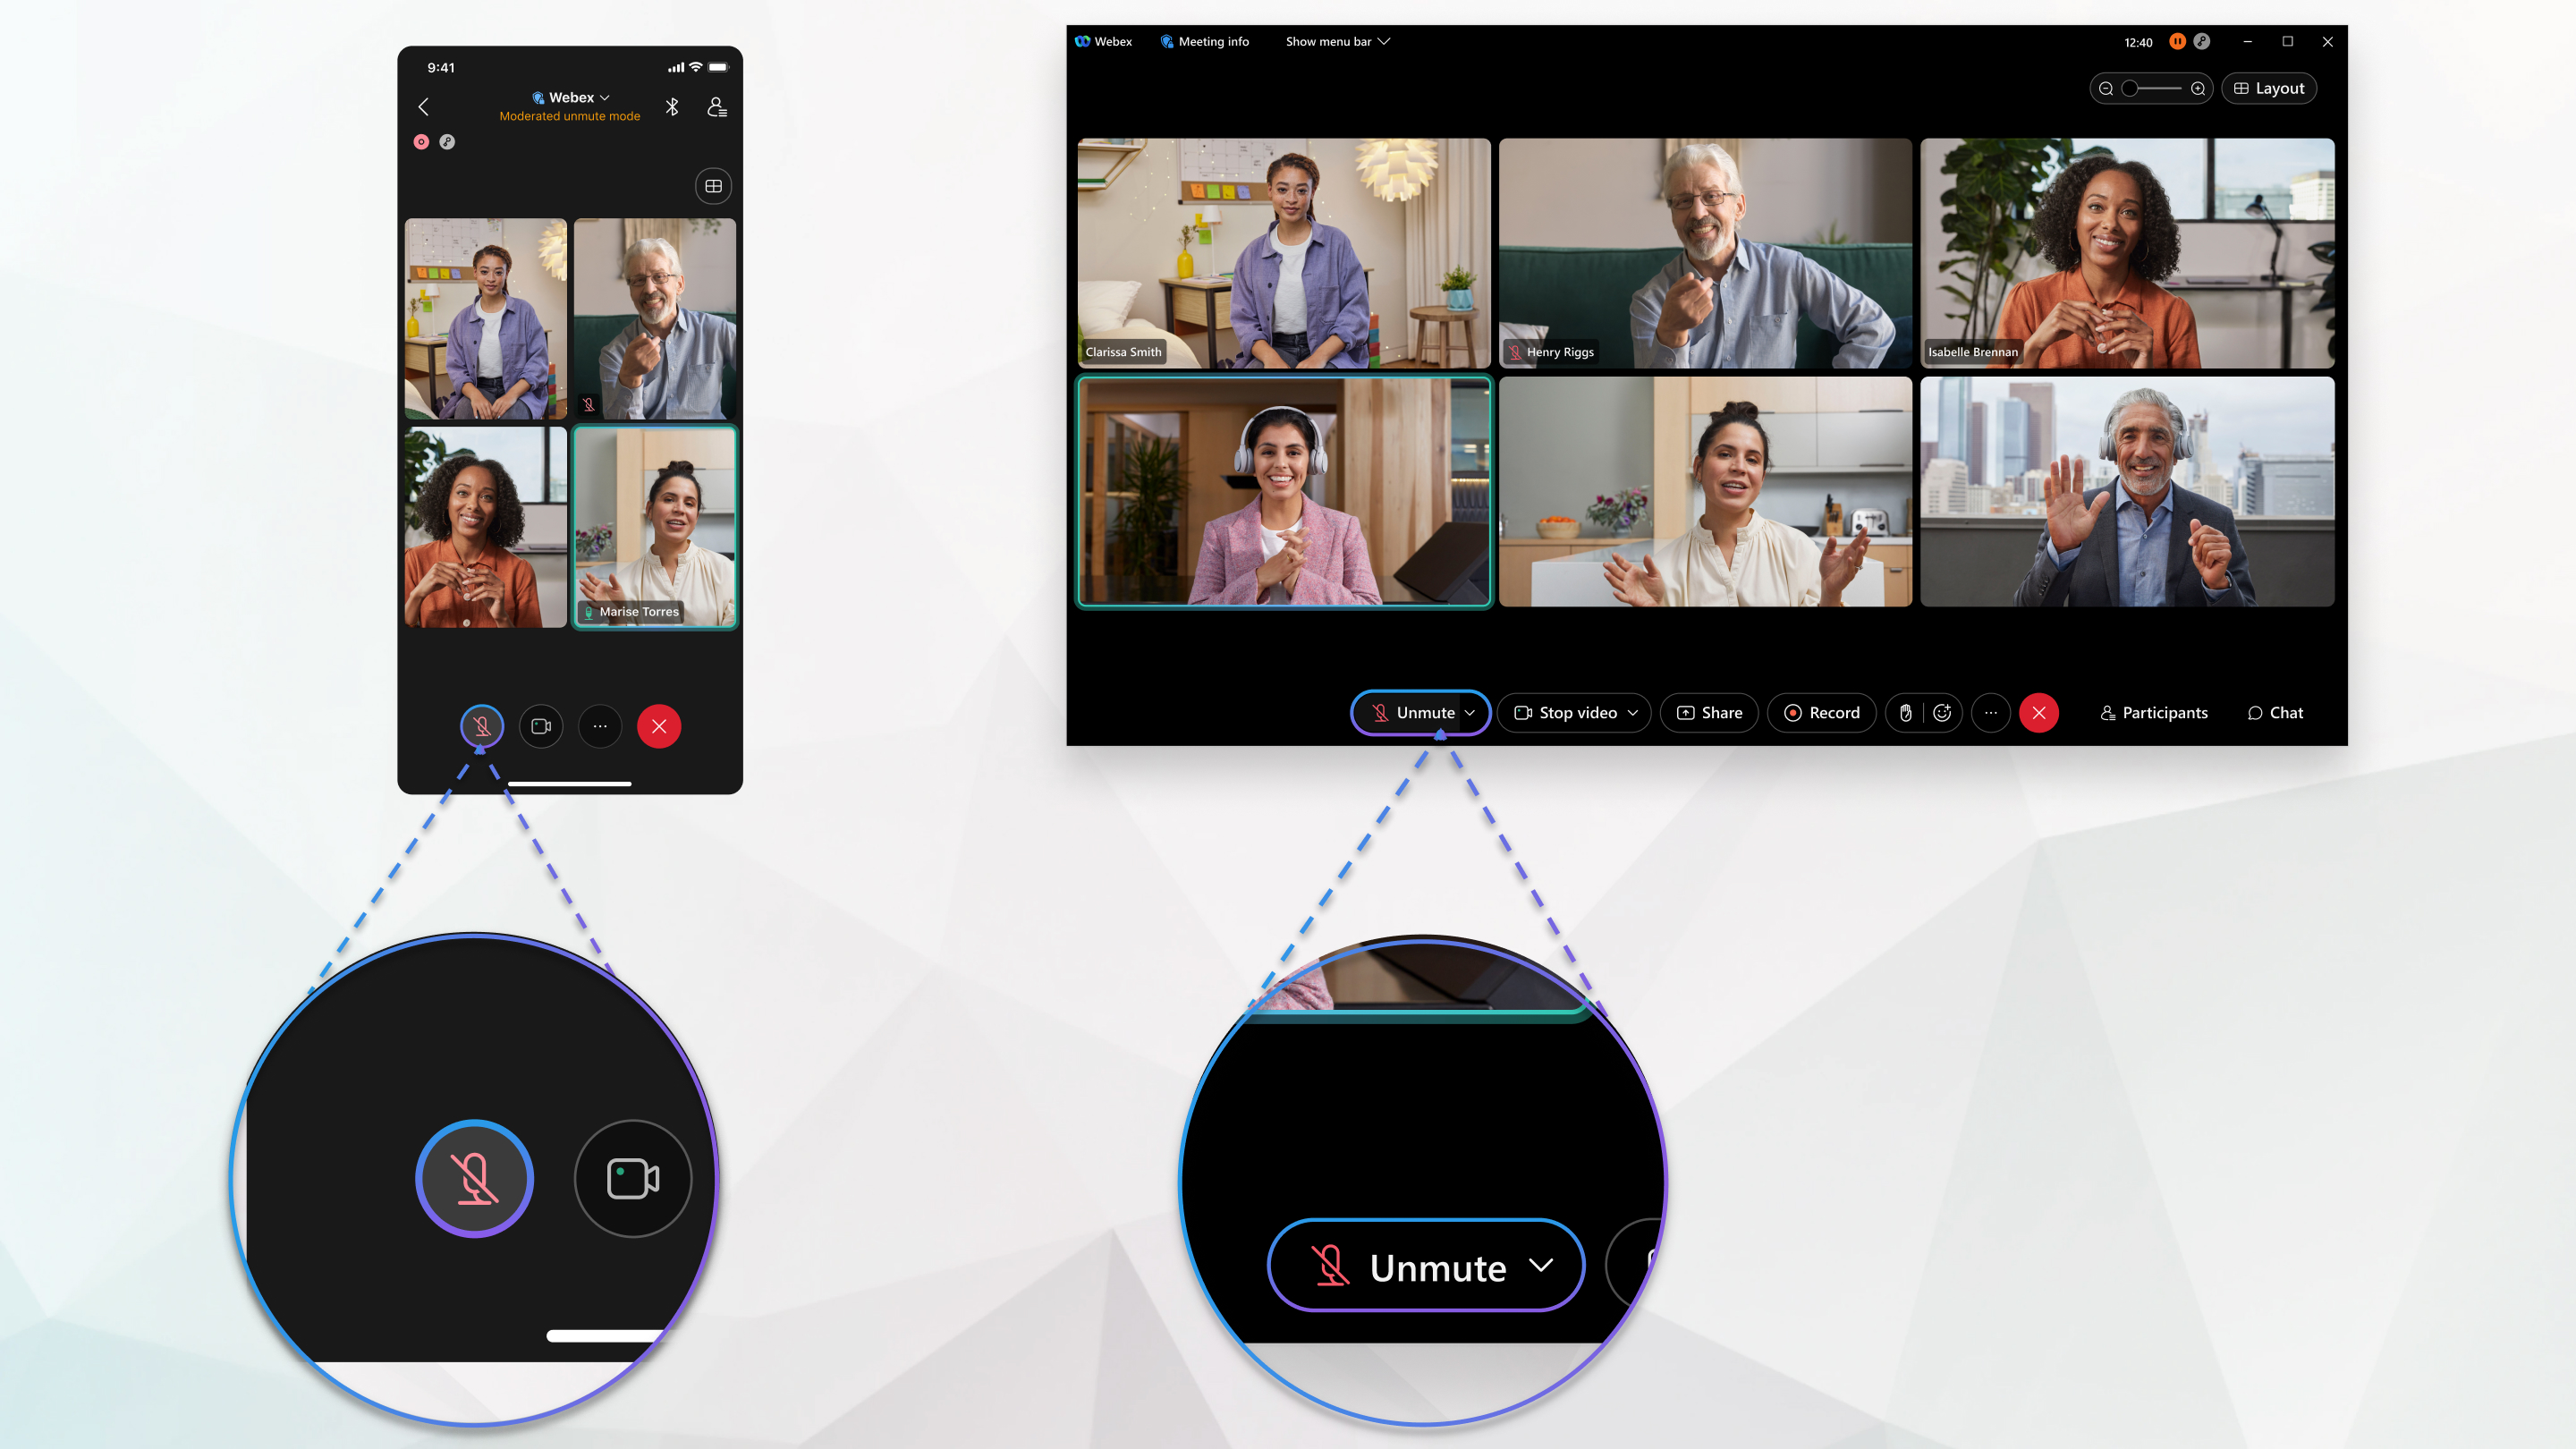 Mute and unmute yourself in a meeting